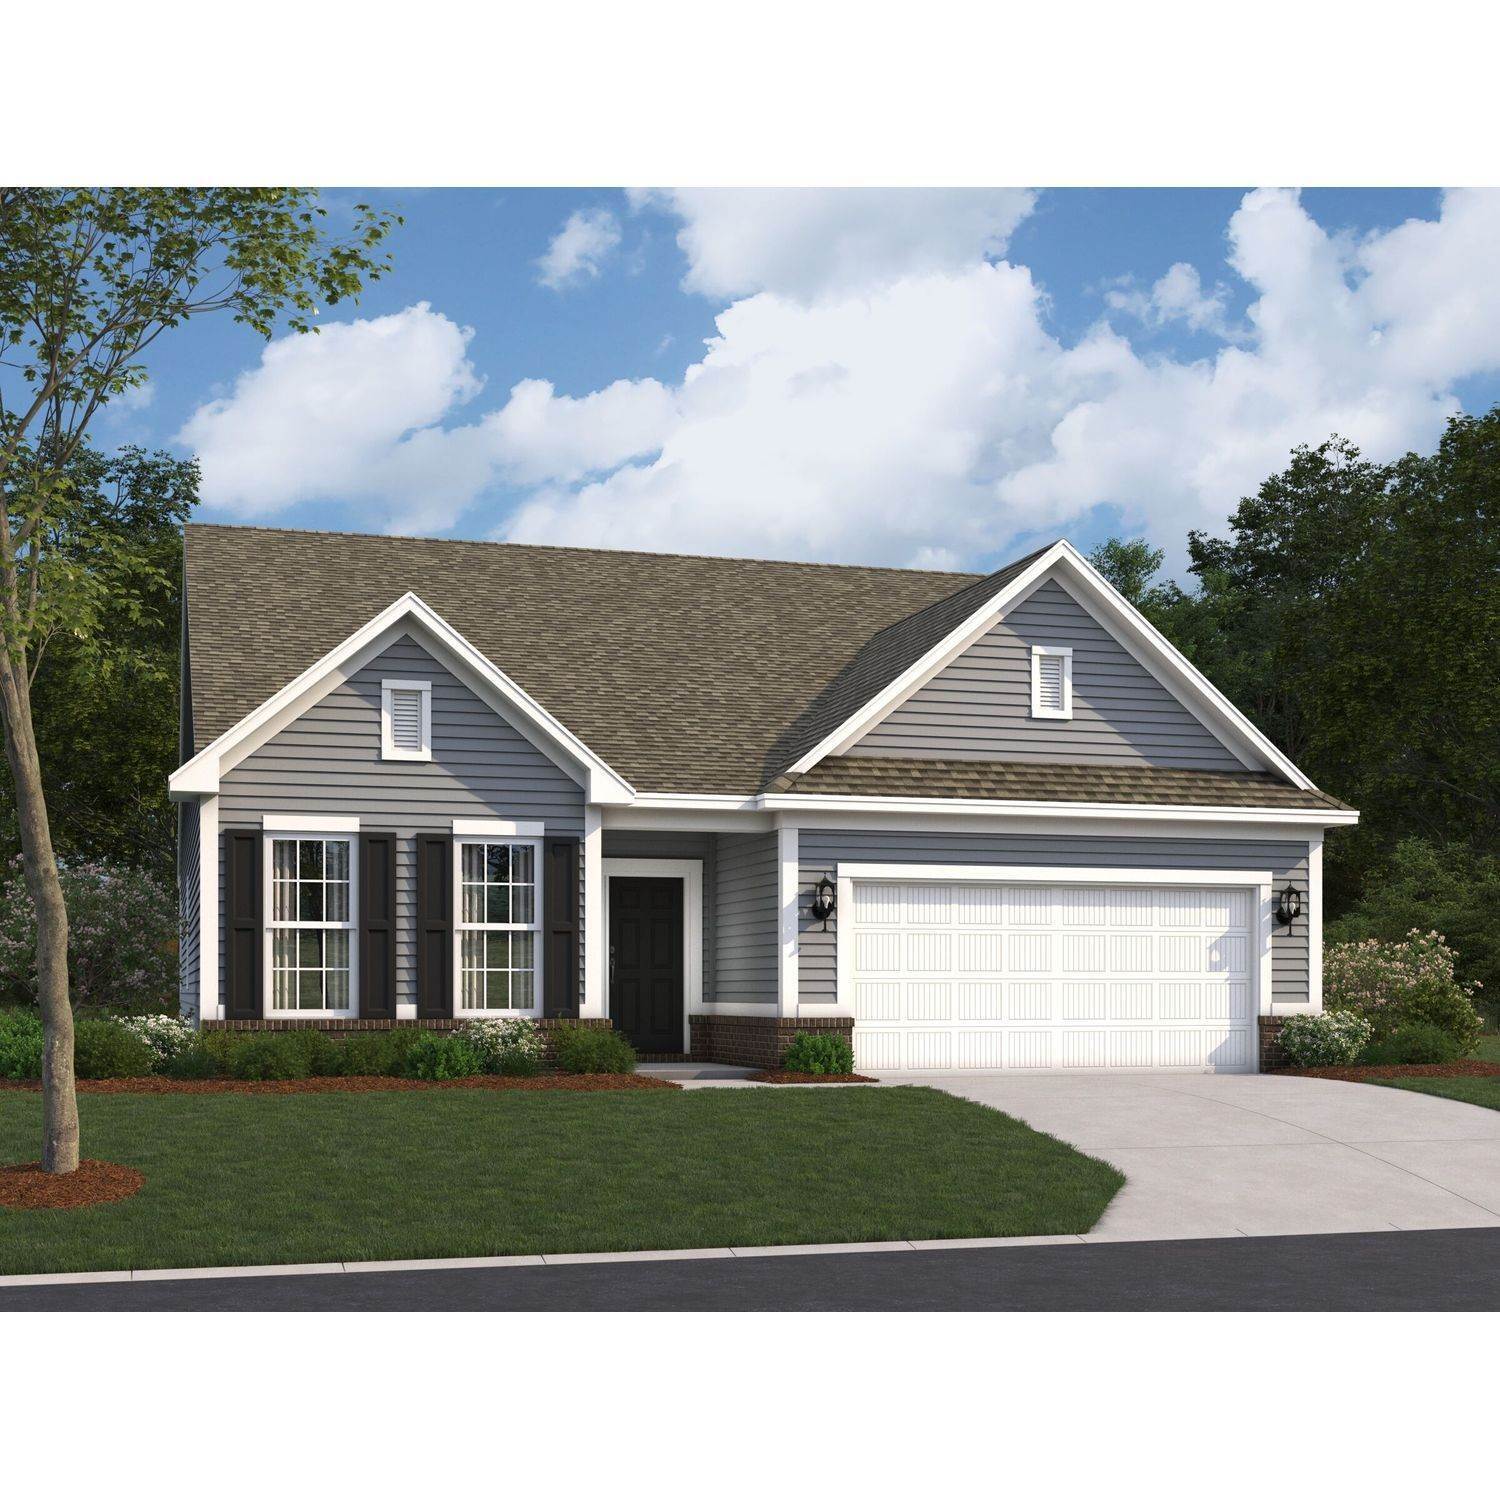 Single Family for Sale at Noblesville, IN 46060